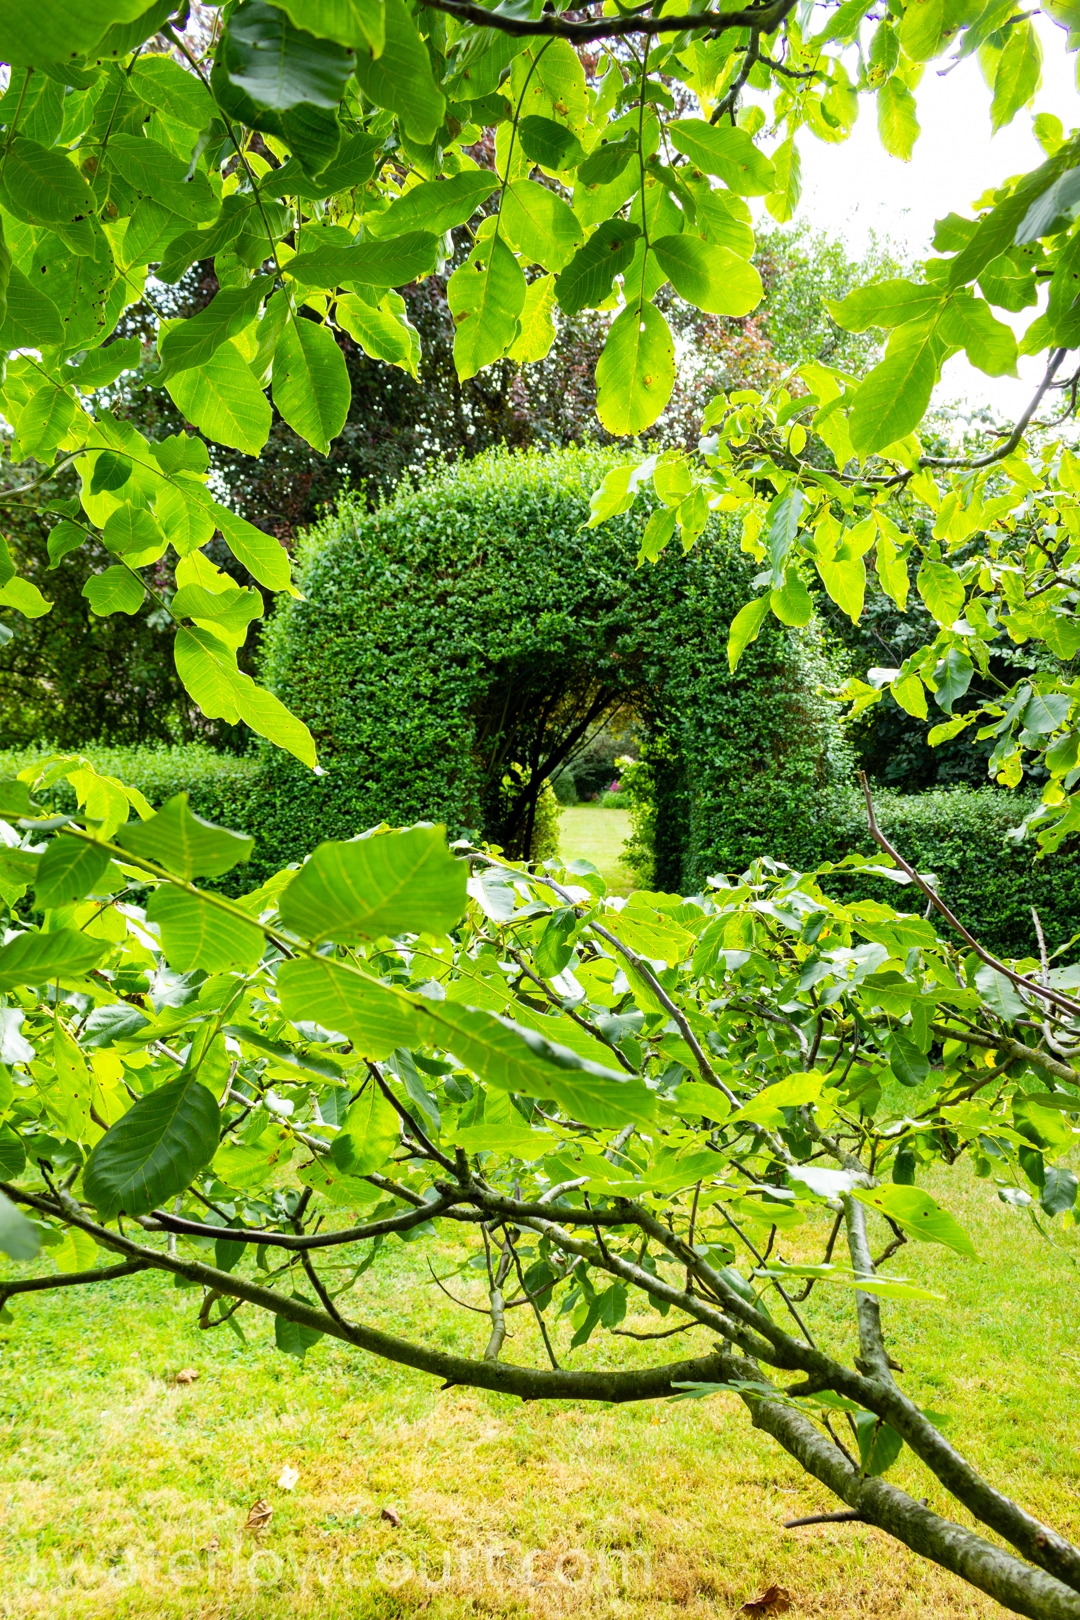 An arched hedgerow in the stunning communal gardens at Waterlow Court. Waterlow Court is an Arts & Crafts Grade II* listed building, designed by M. H. Baillie Scott, 1909. Located in Hampstead Garden Suburb, London NW11 7DT. Flat 1 Waterlow Court is a one-bedroom, ground-floor flat, and is for sale. Listed on Rightmove and Zoopla.